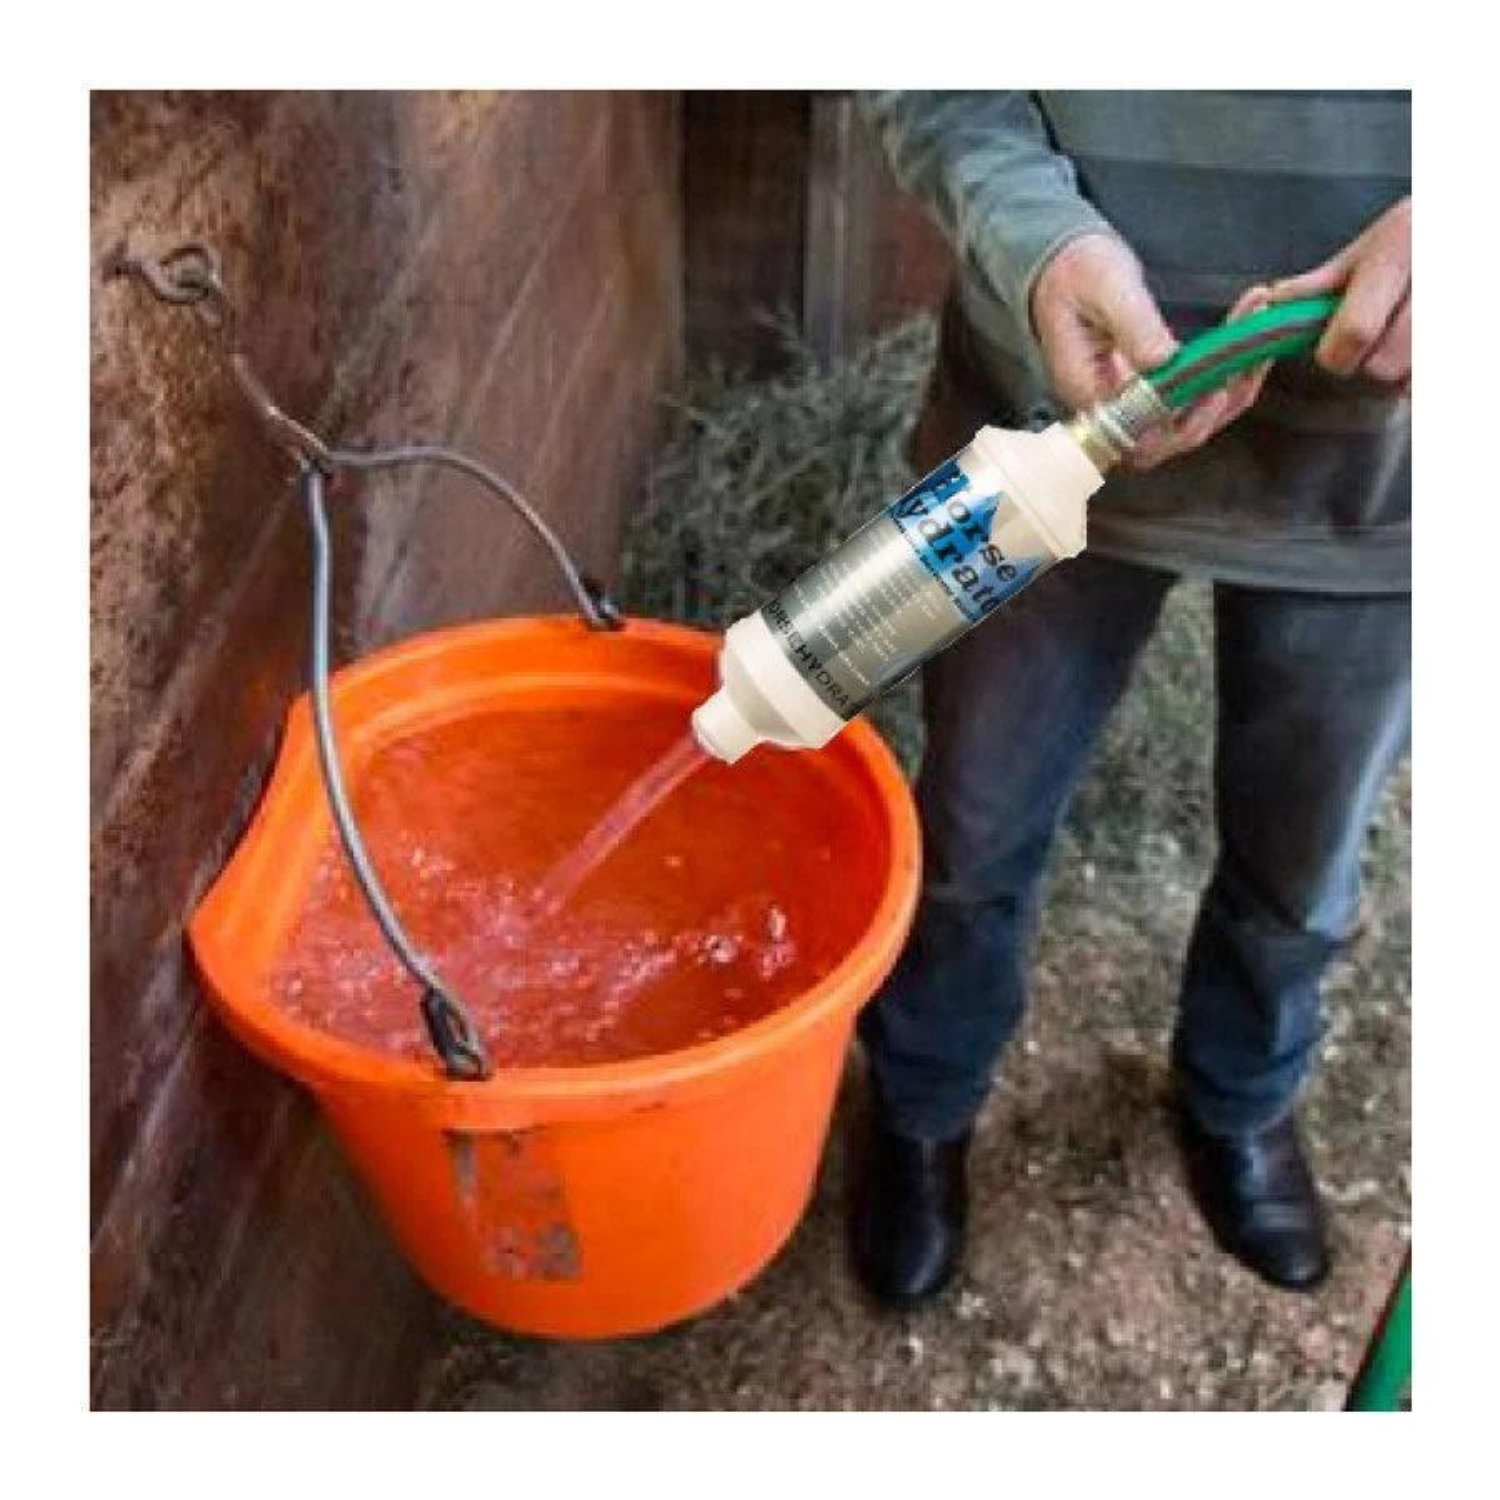 Horse Hydrator Water Filter System